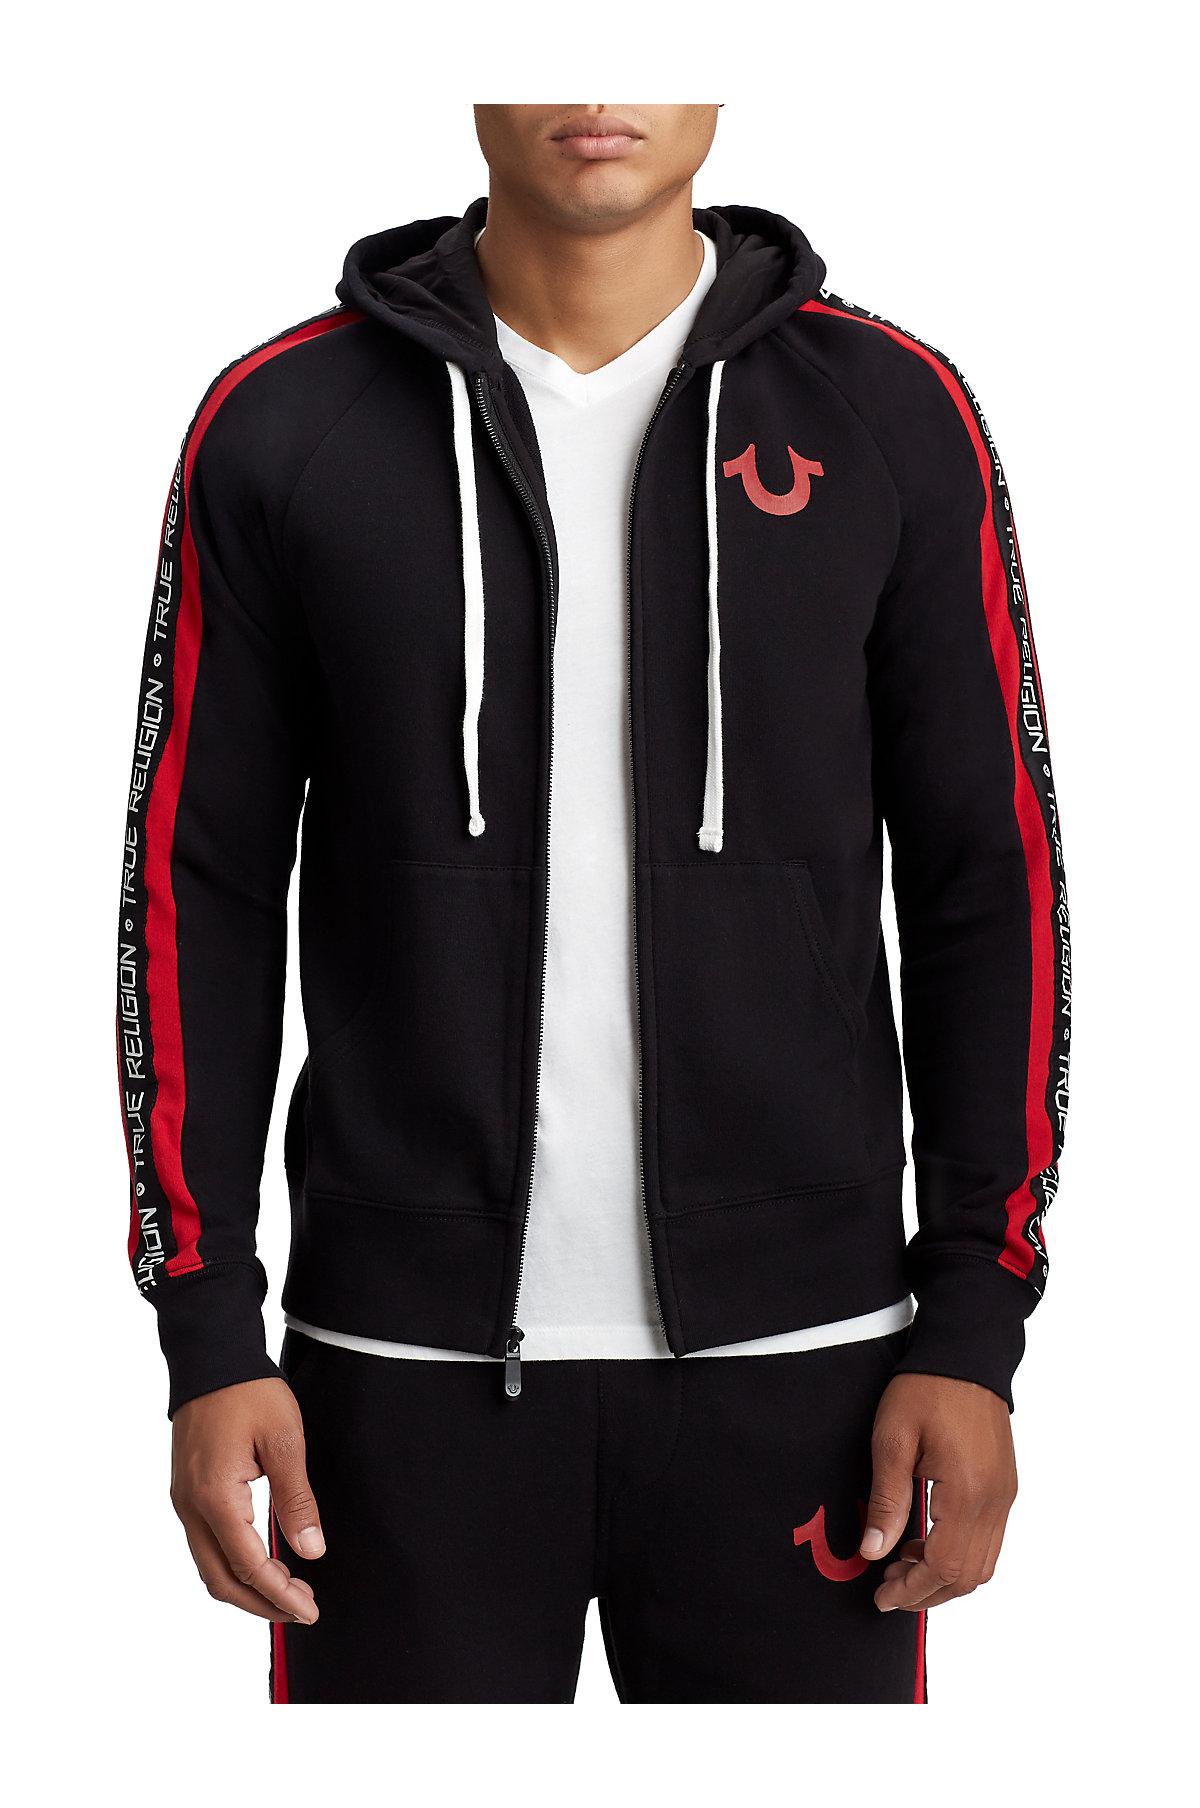 black and red true religion hoodie